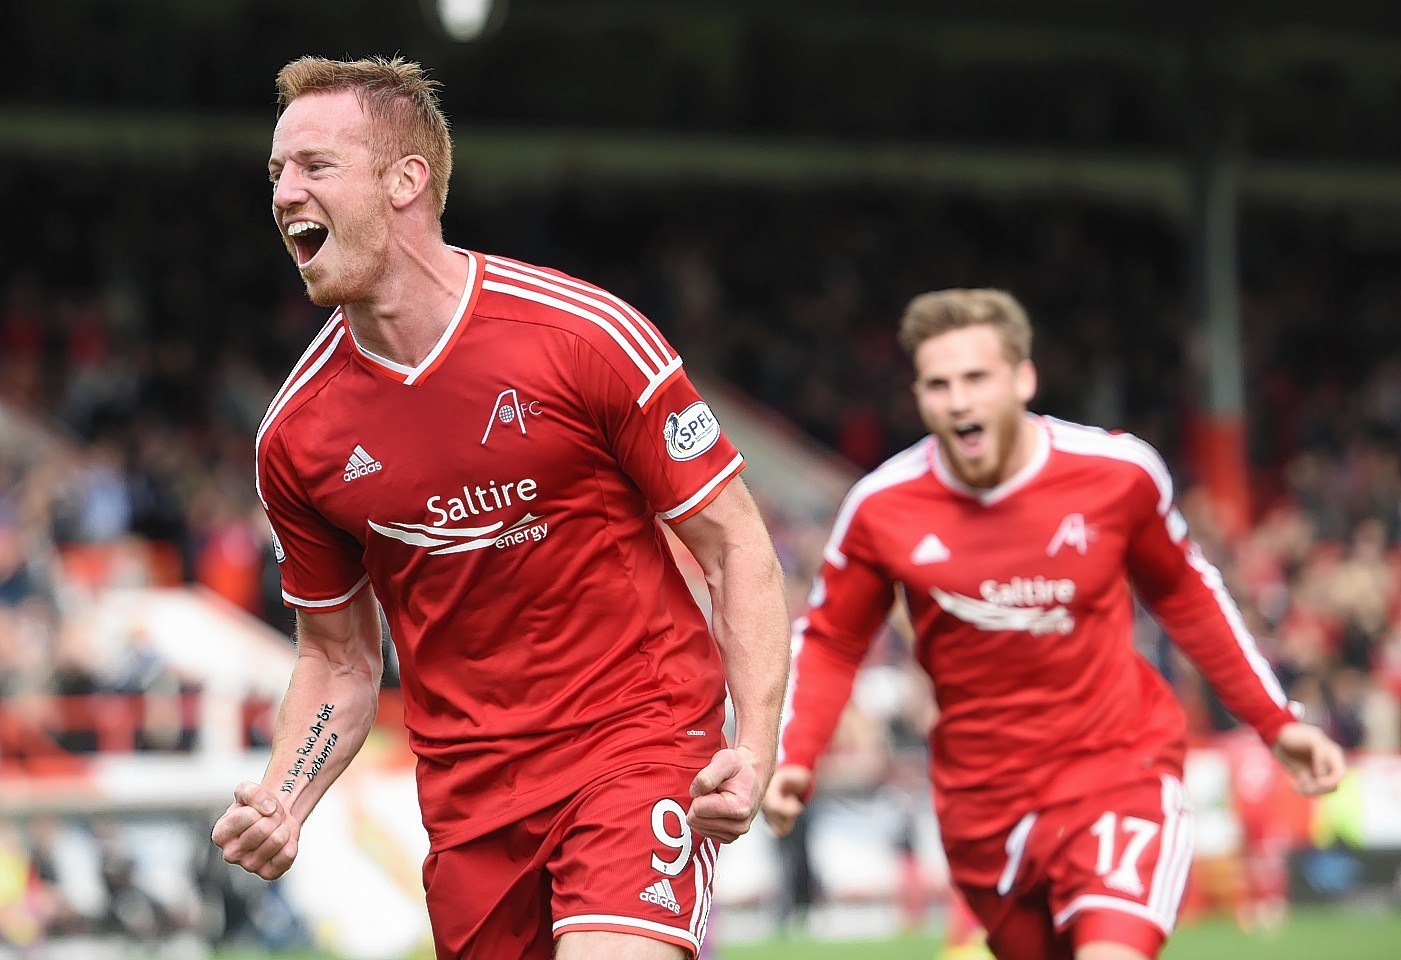 Keep updated on Aberdeen v Motherwell with our live blog